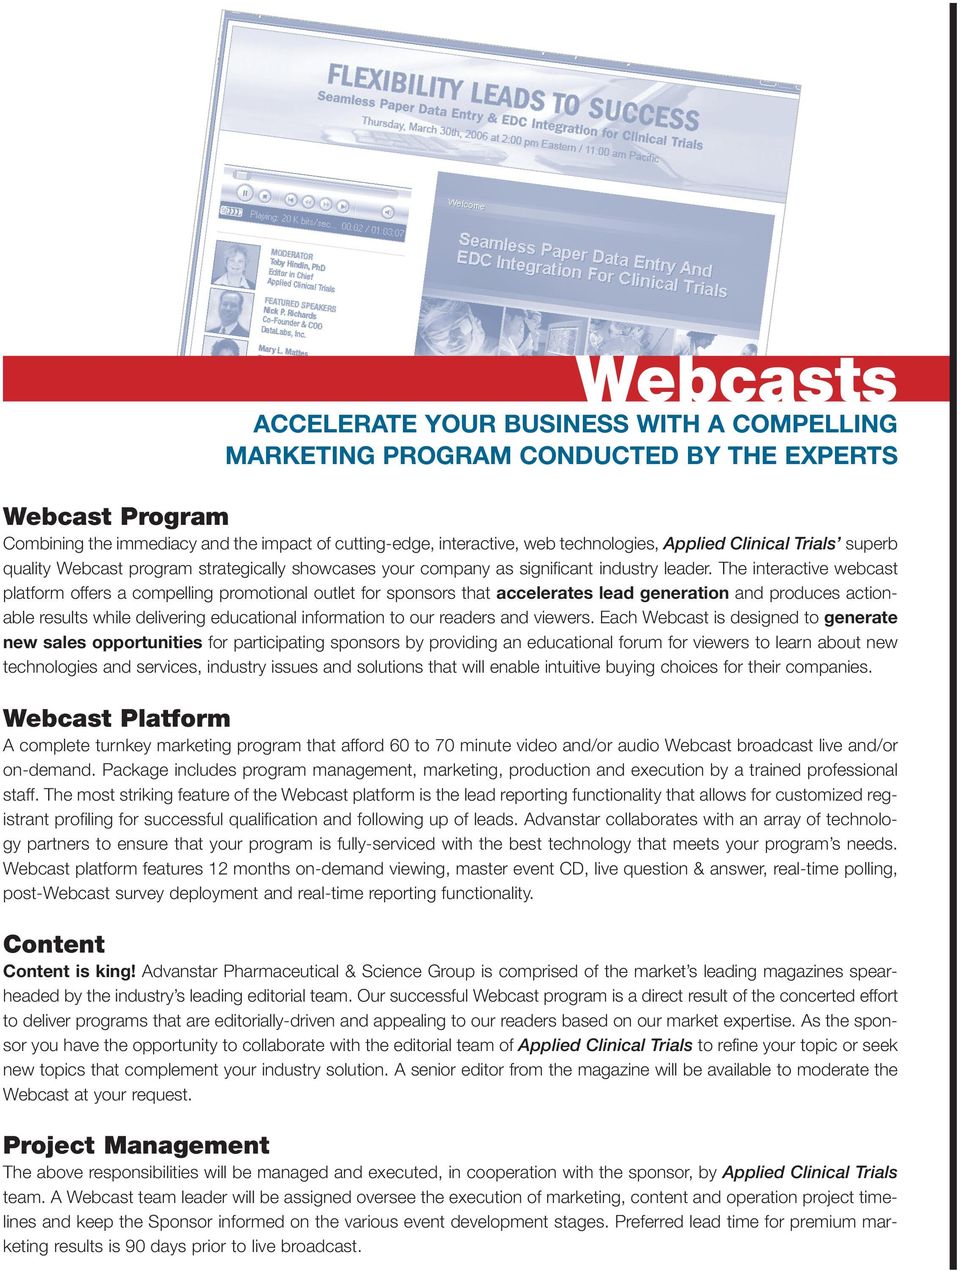 The interactive webcast platform offers a compelling promotional outlet for sponsors that accelerates lead generation and produces actionable results while delivering educational information to our